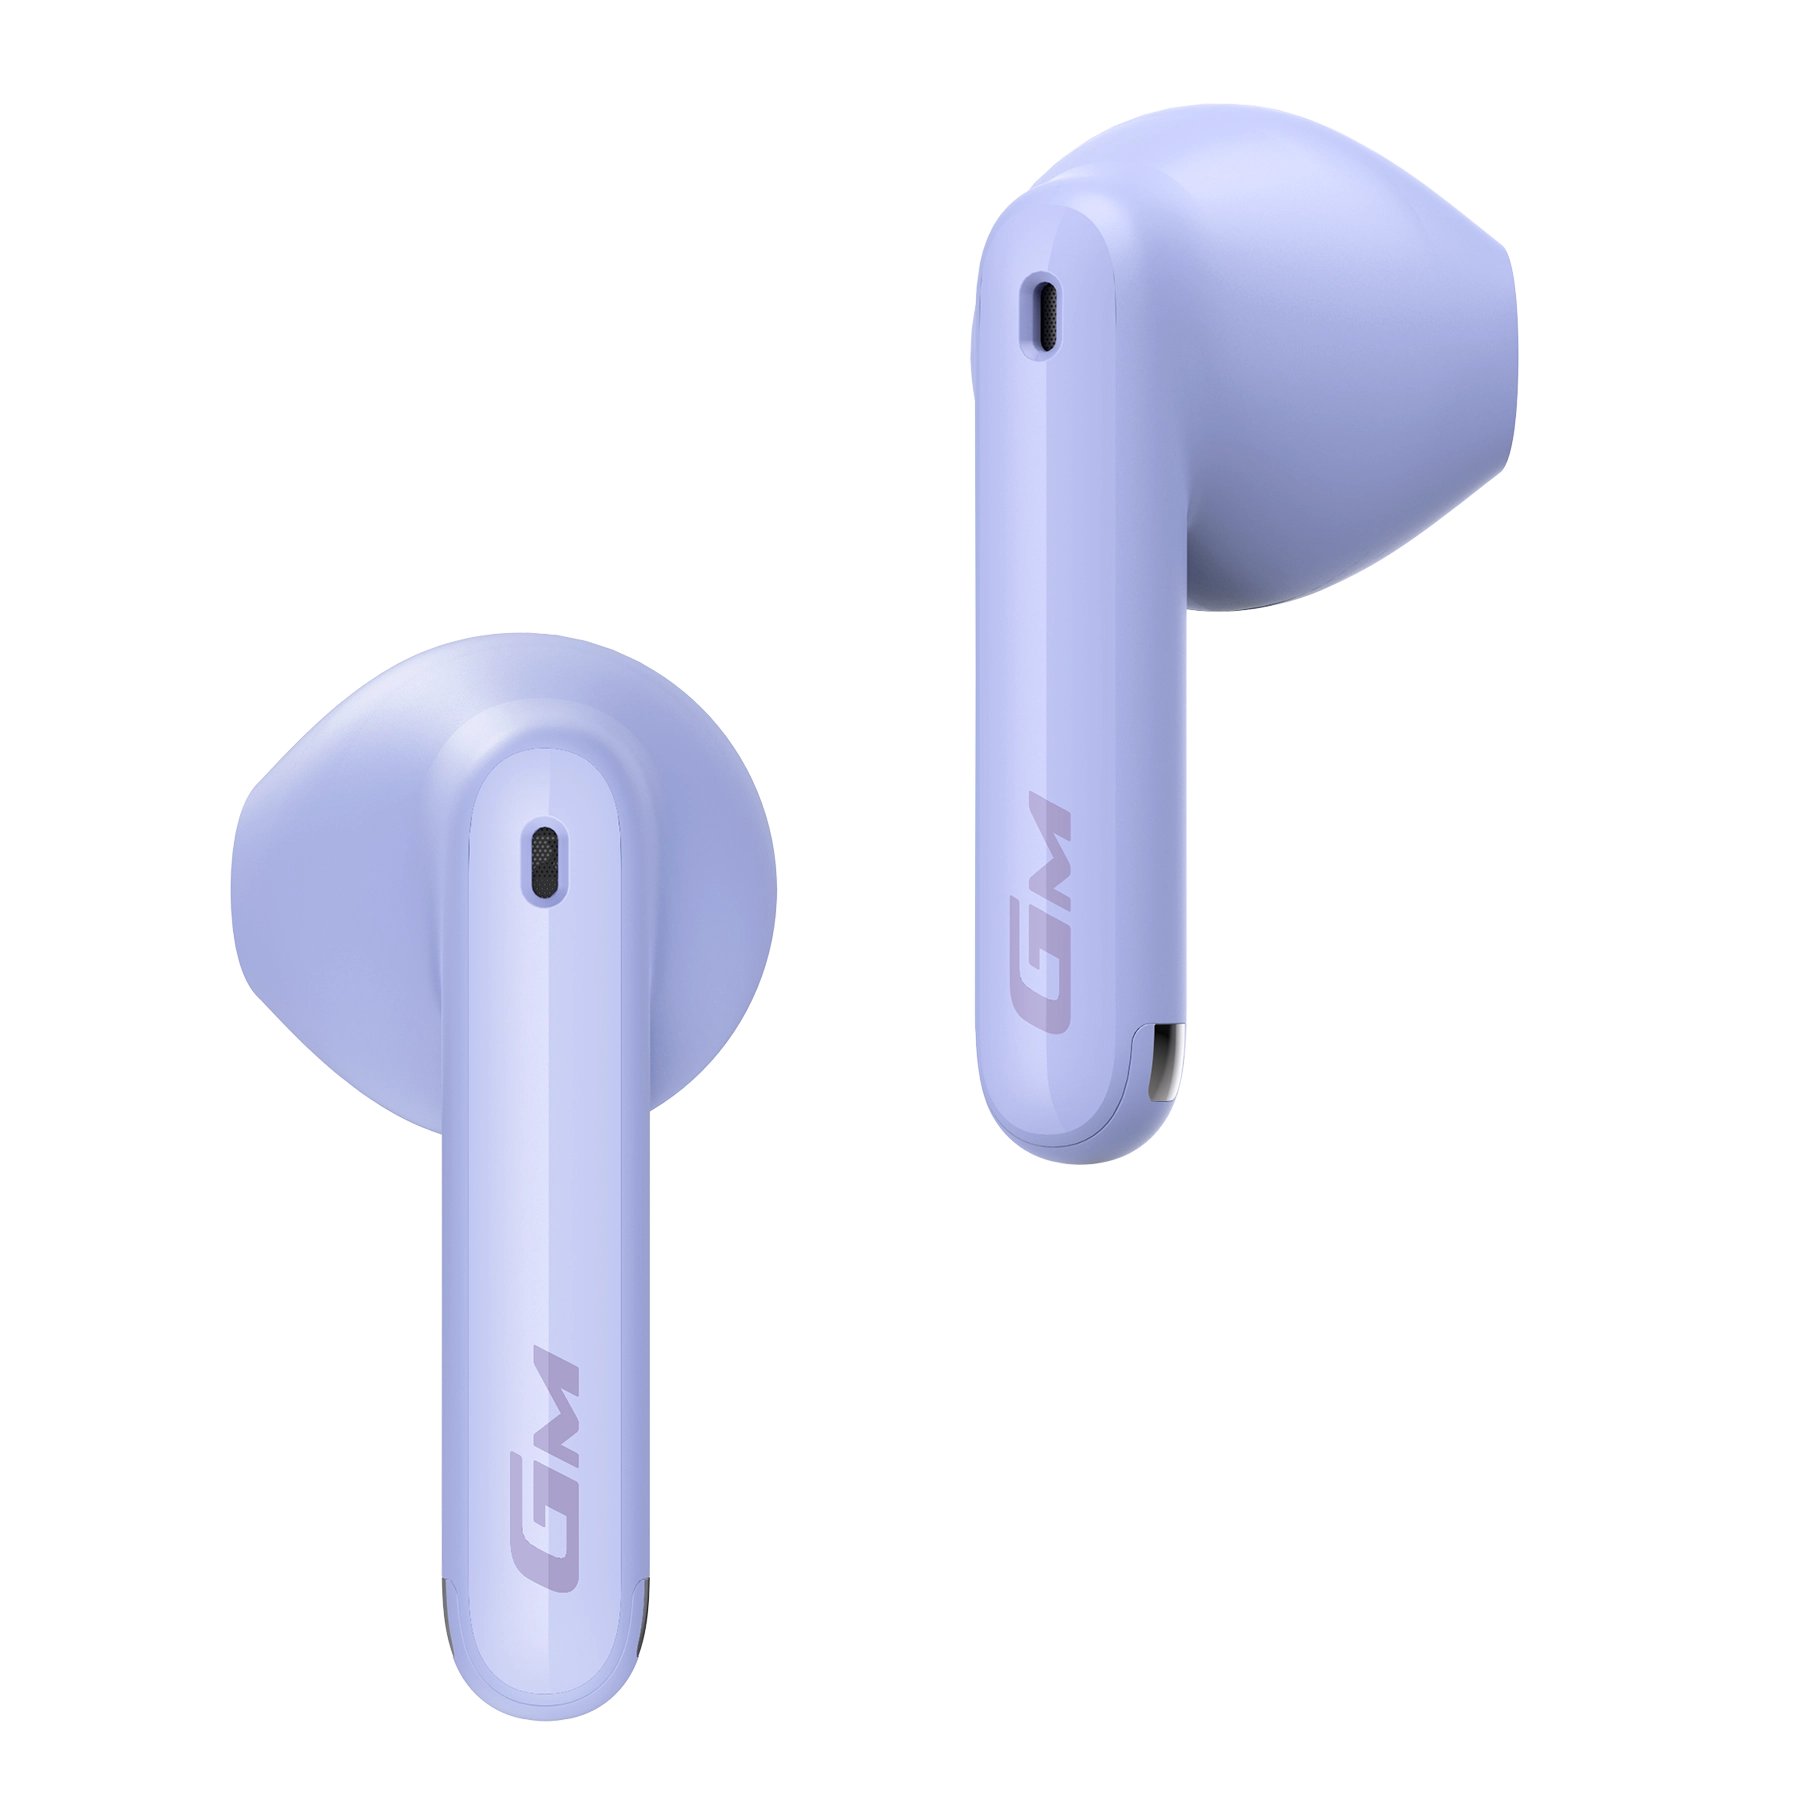 GM3 Plus Wireless Earbuds Product Pictures purplr_3